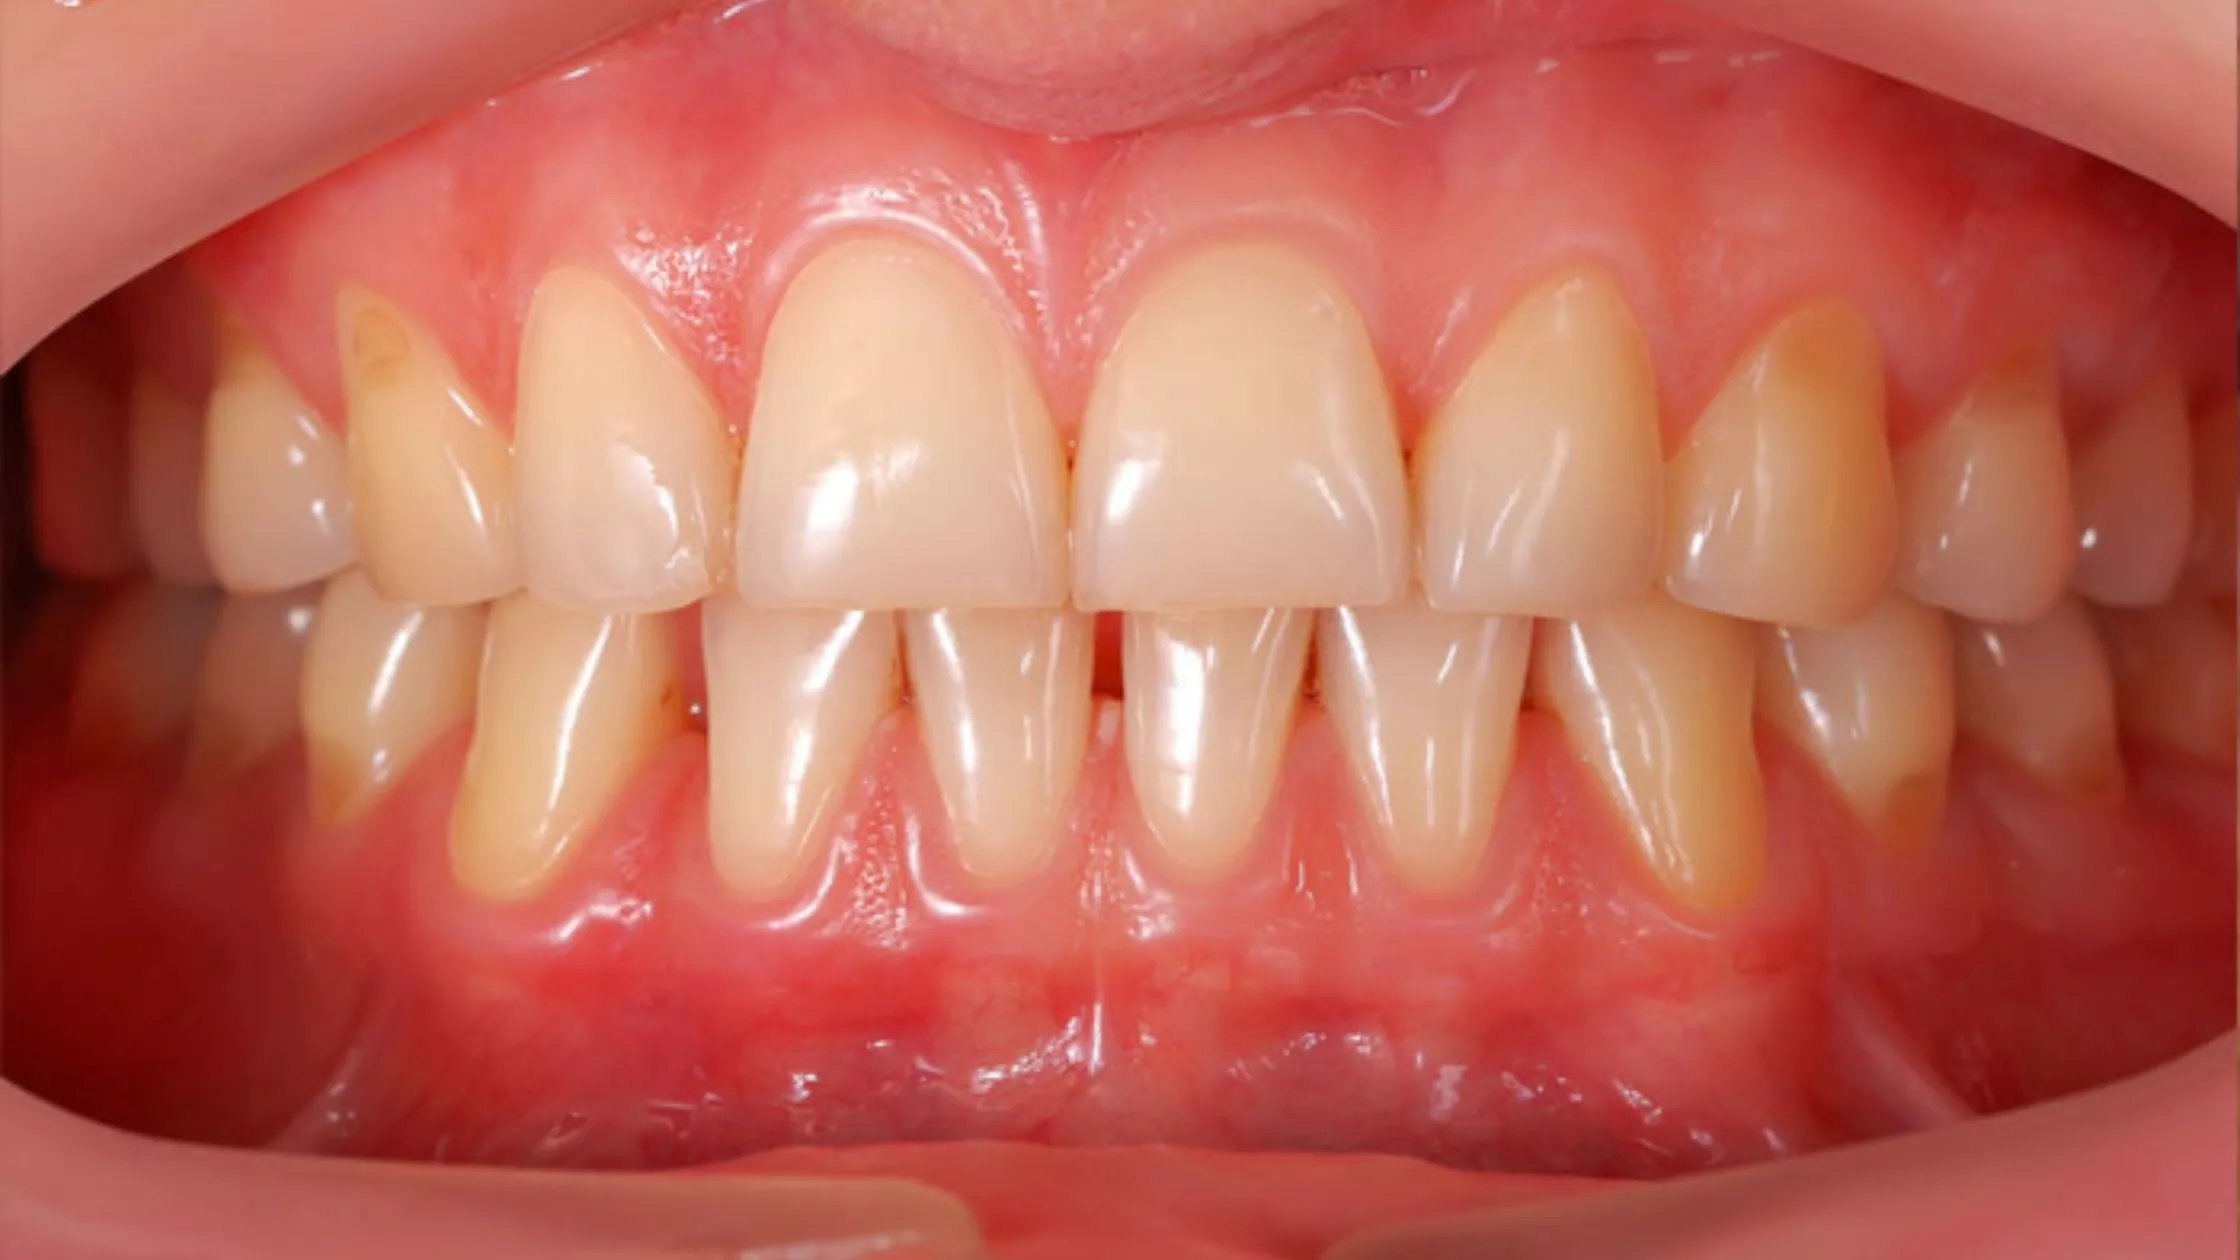 Is It Possible to Cure Gum Disease Without a Dentist?